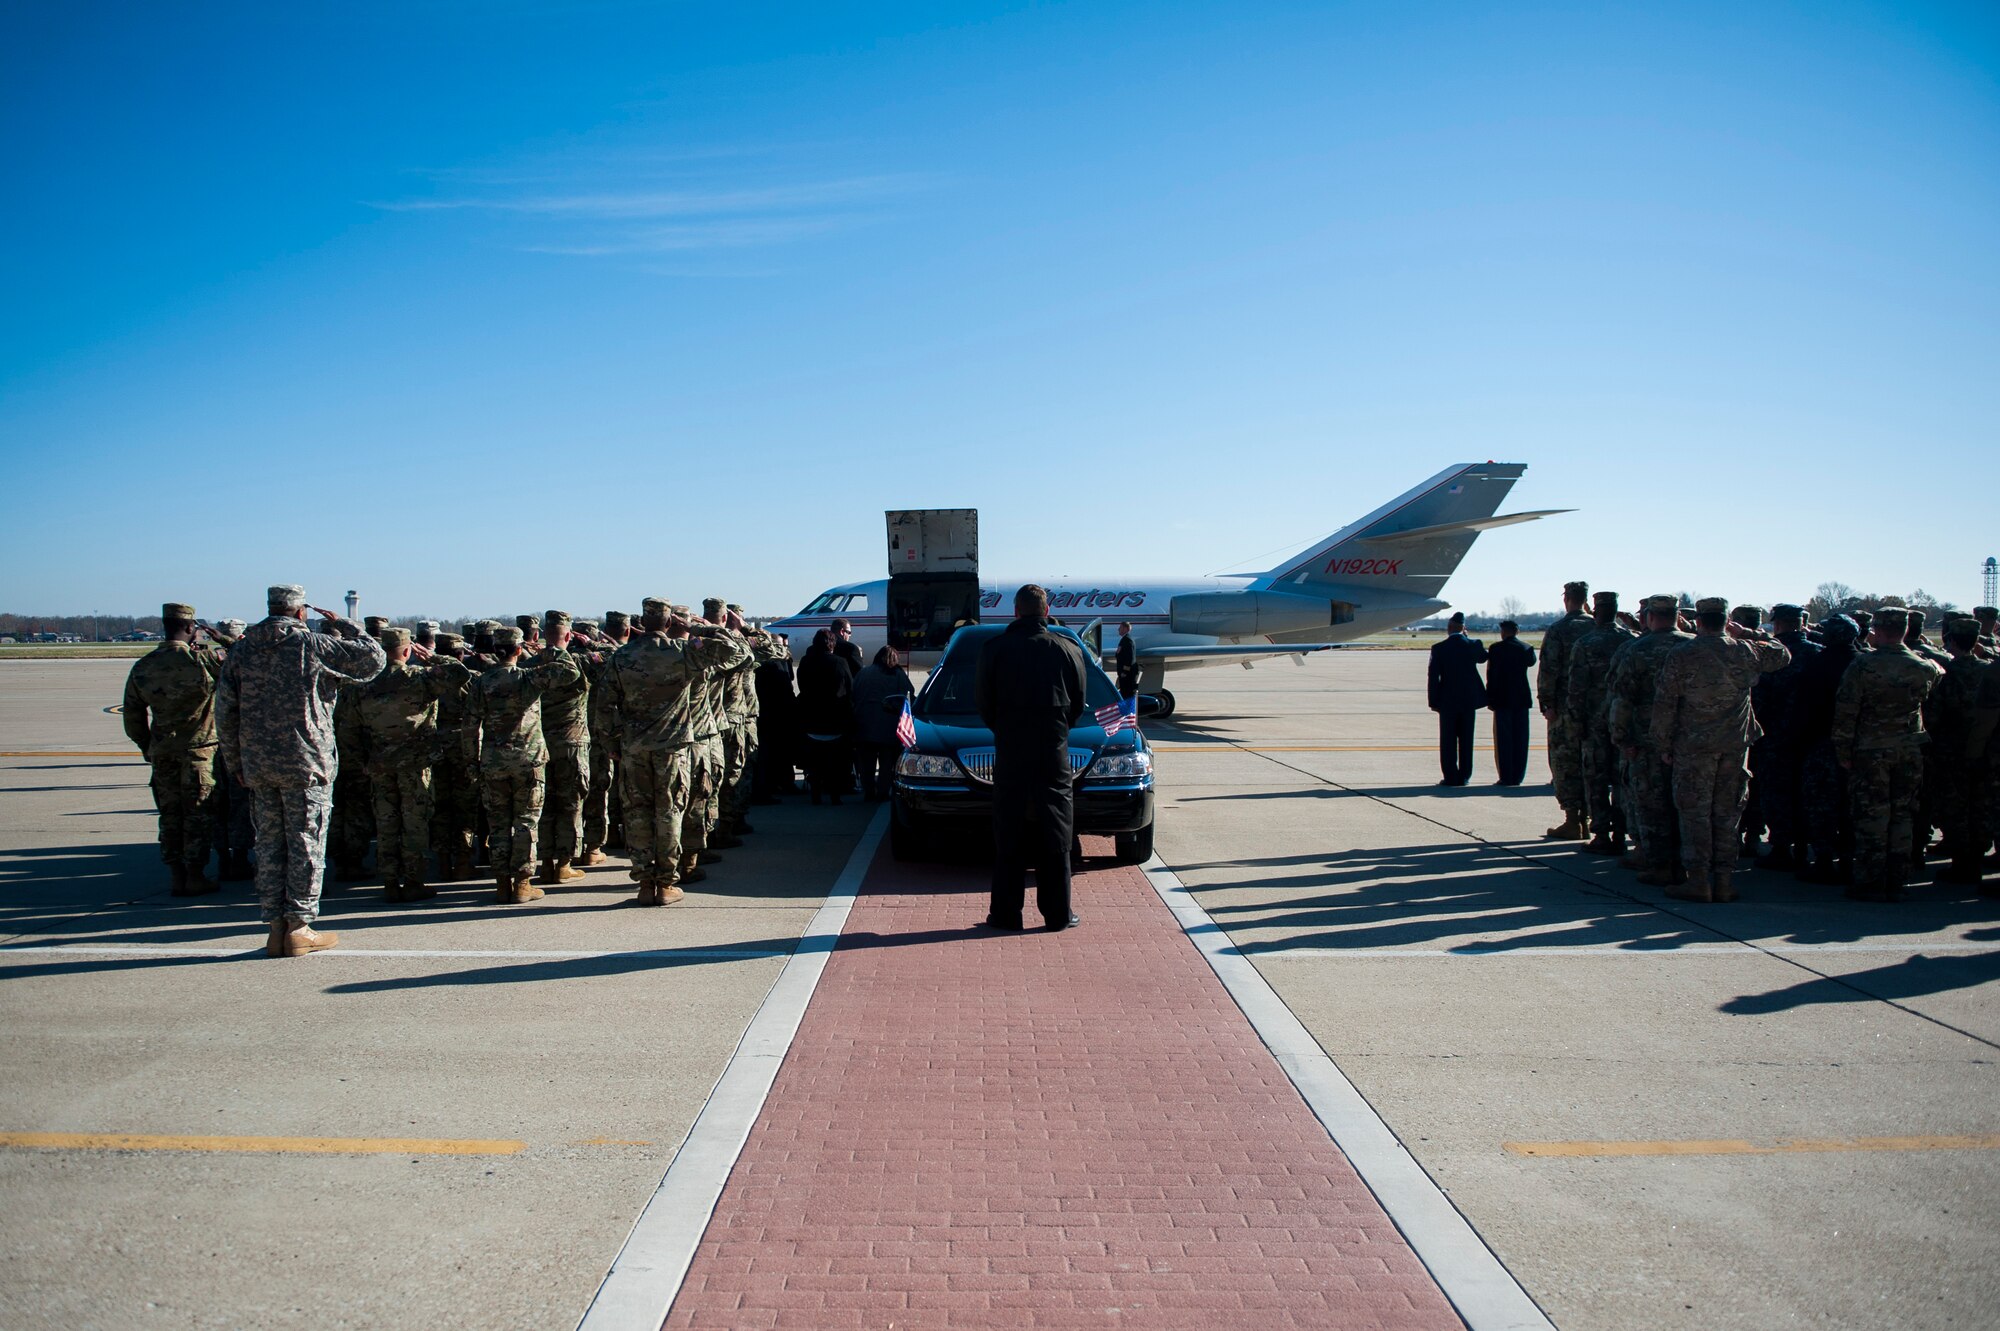 Members of Scott Air Force Base, Illinois salute during a dignified transfer ceremony for Pfc. Tyler Iubelt 21 Nov., 2016. Iubelt passed away on 12 Nov. while deployed to Bagram, Afghanistan. (U.S. Air Force photo by Staff Sgt. Clayton Lenhardt)